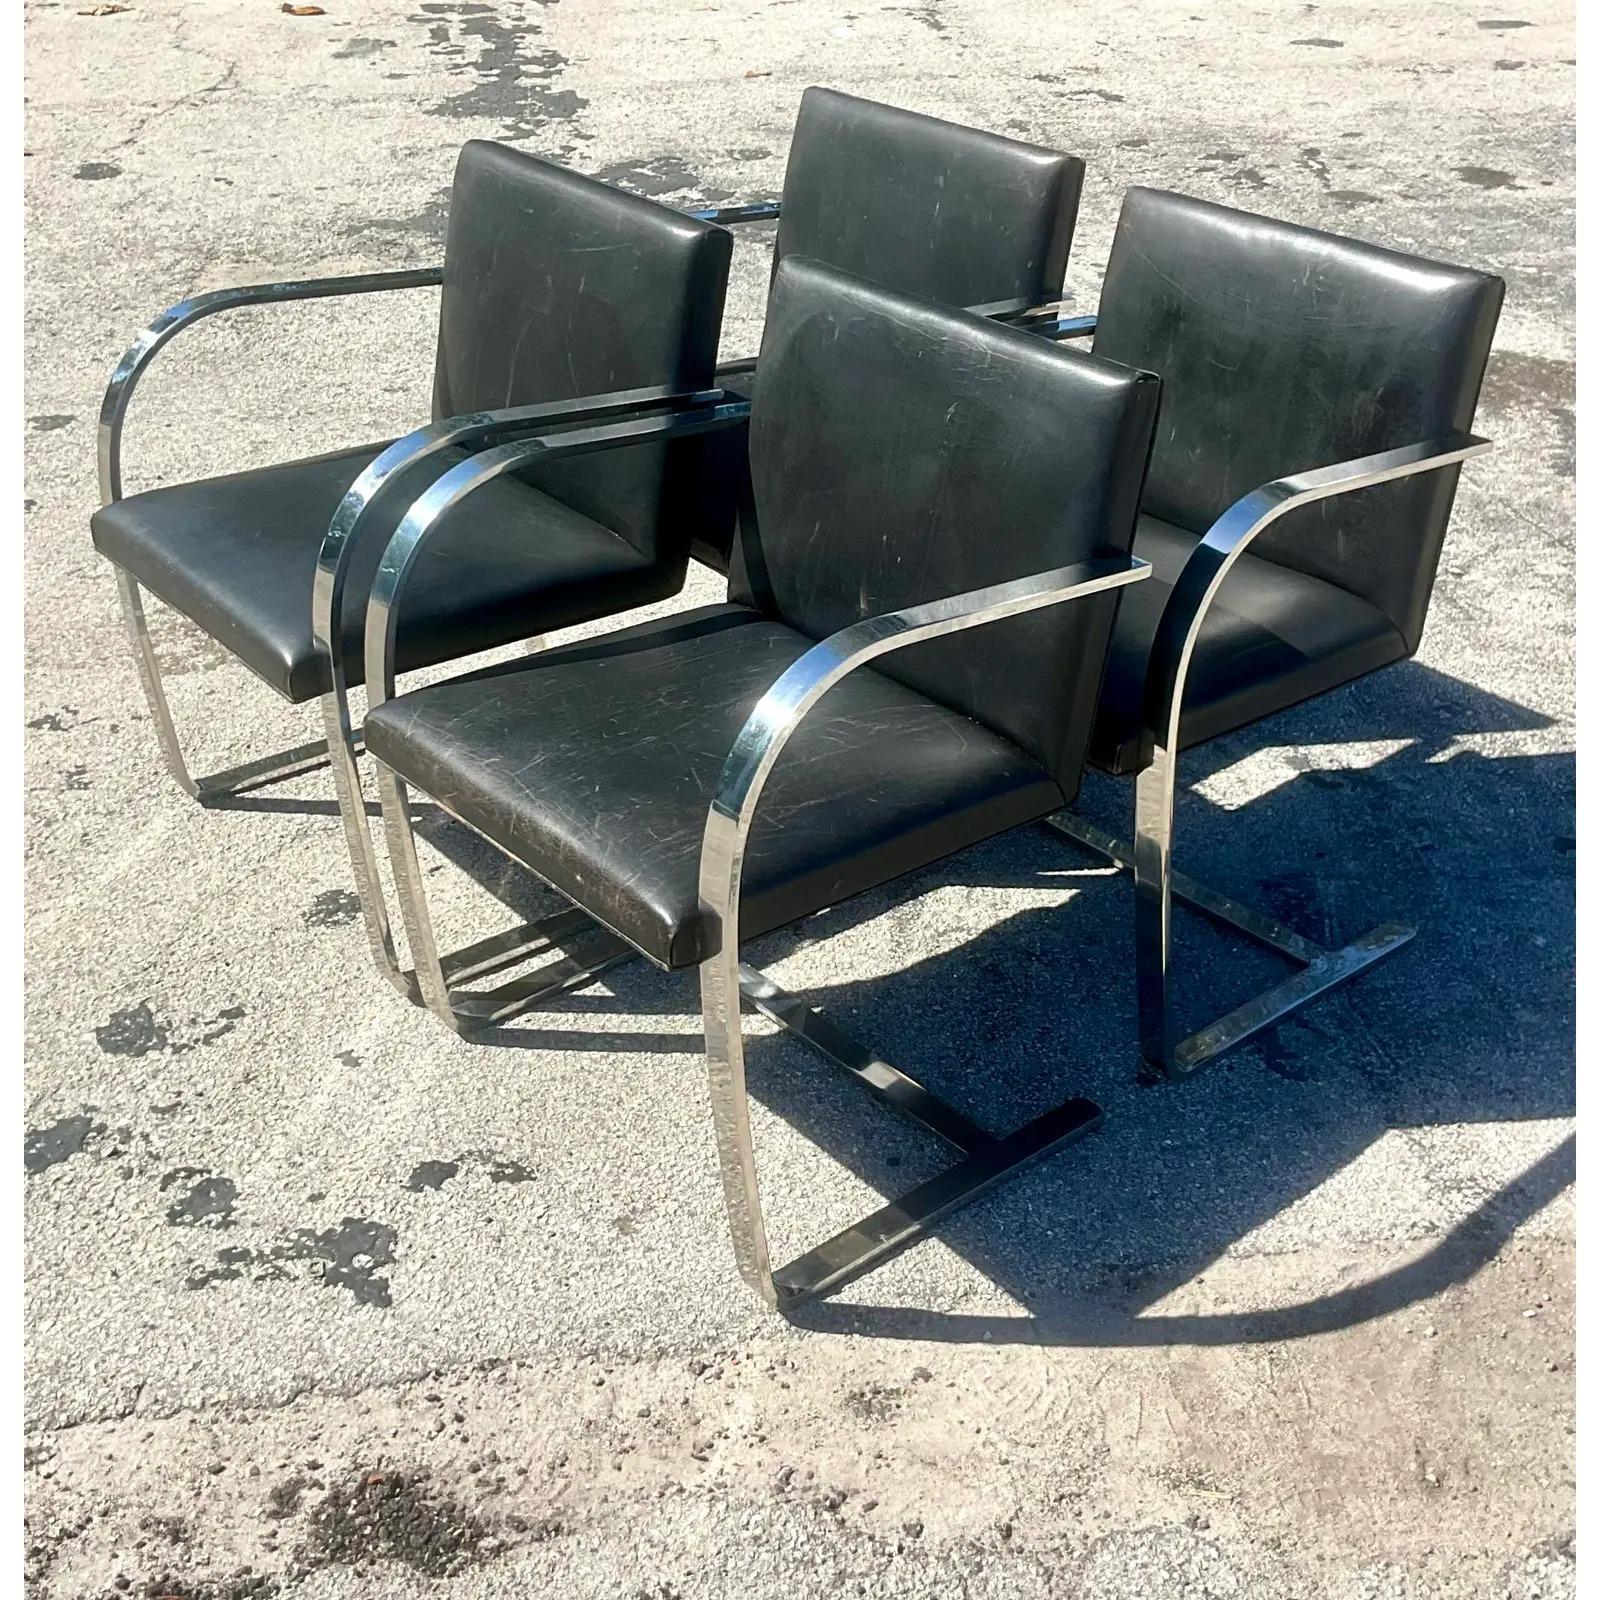 Vintage MCM Miles Van Der Rohe for Knoll Brno Chairs - Set of 4 In Good Condition For Sale In west palm beach, FL